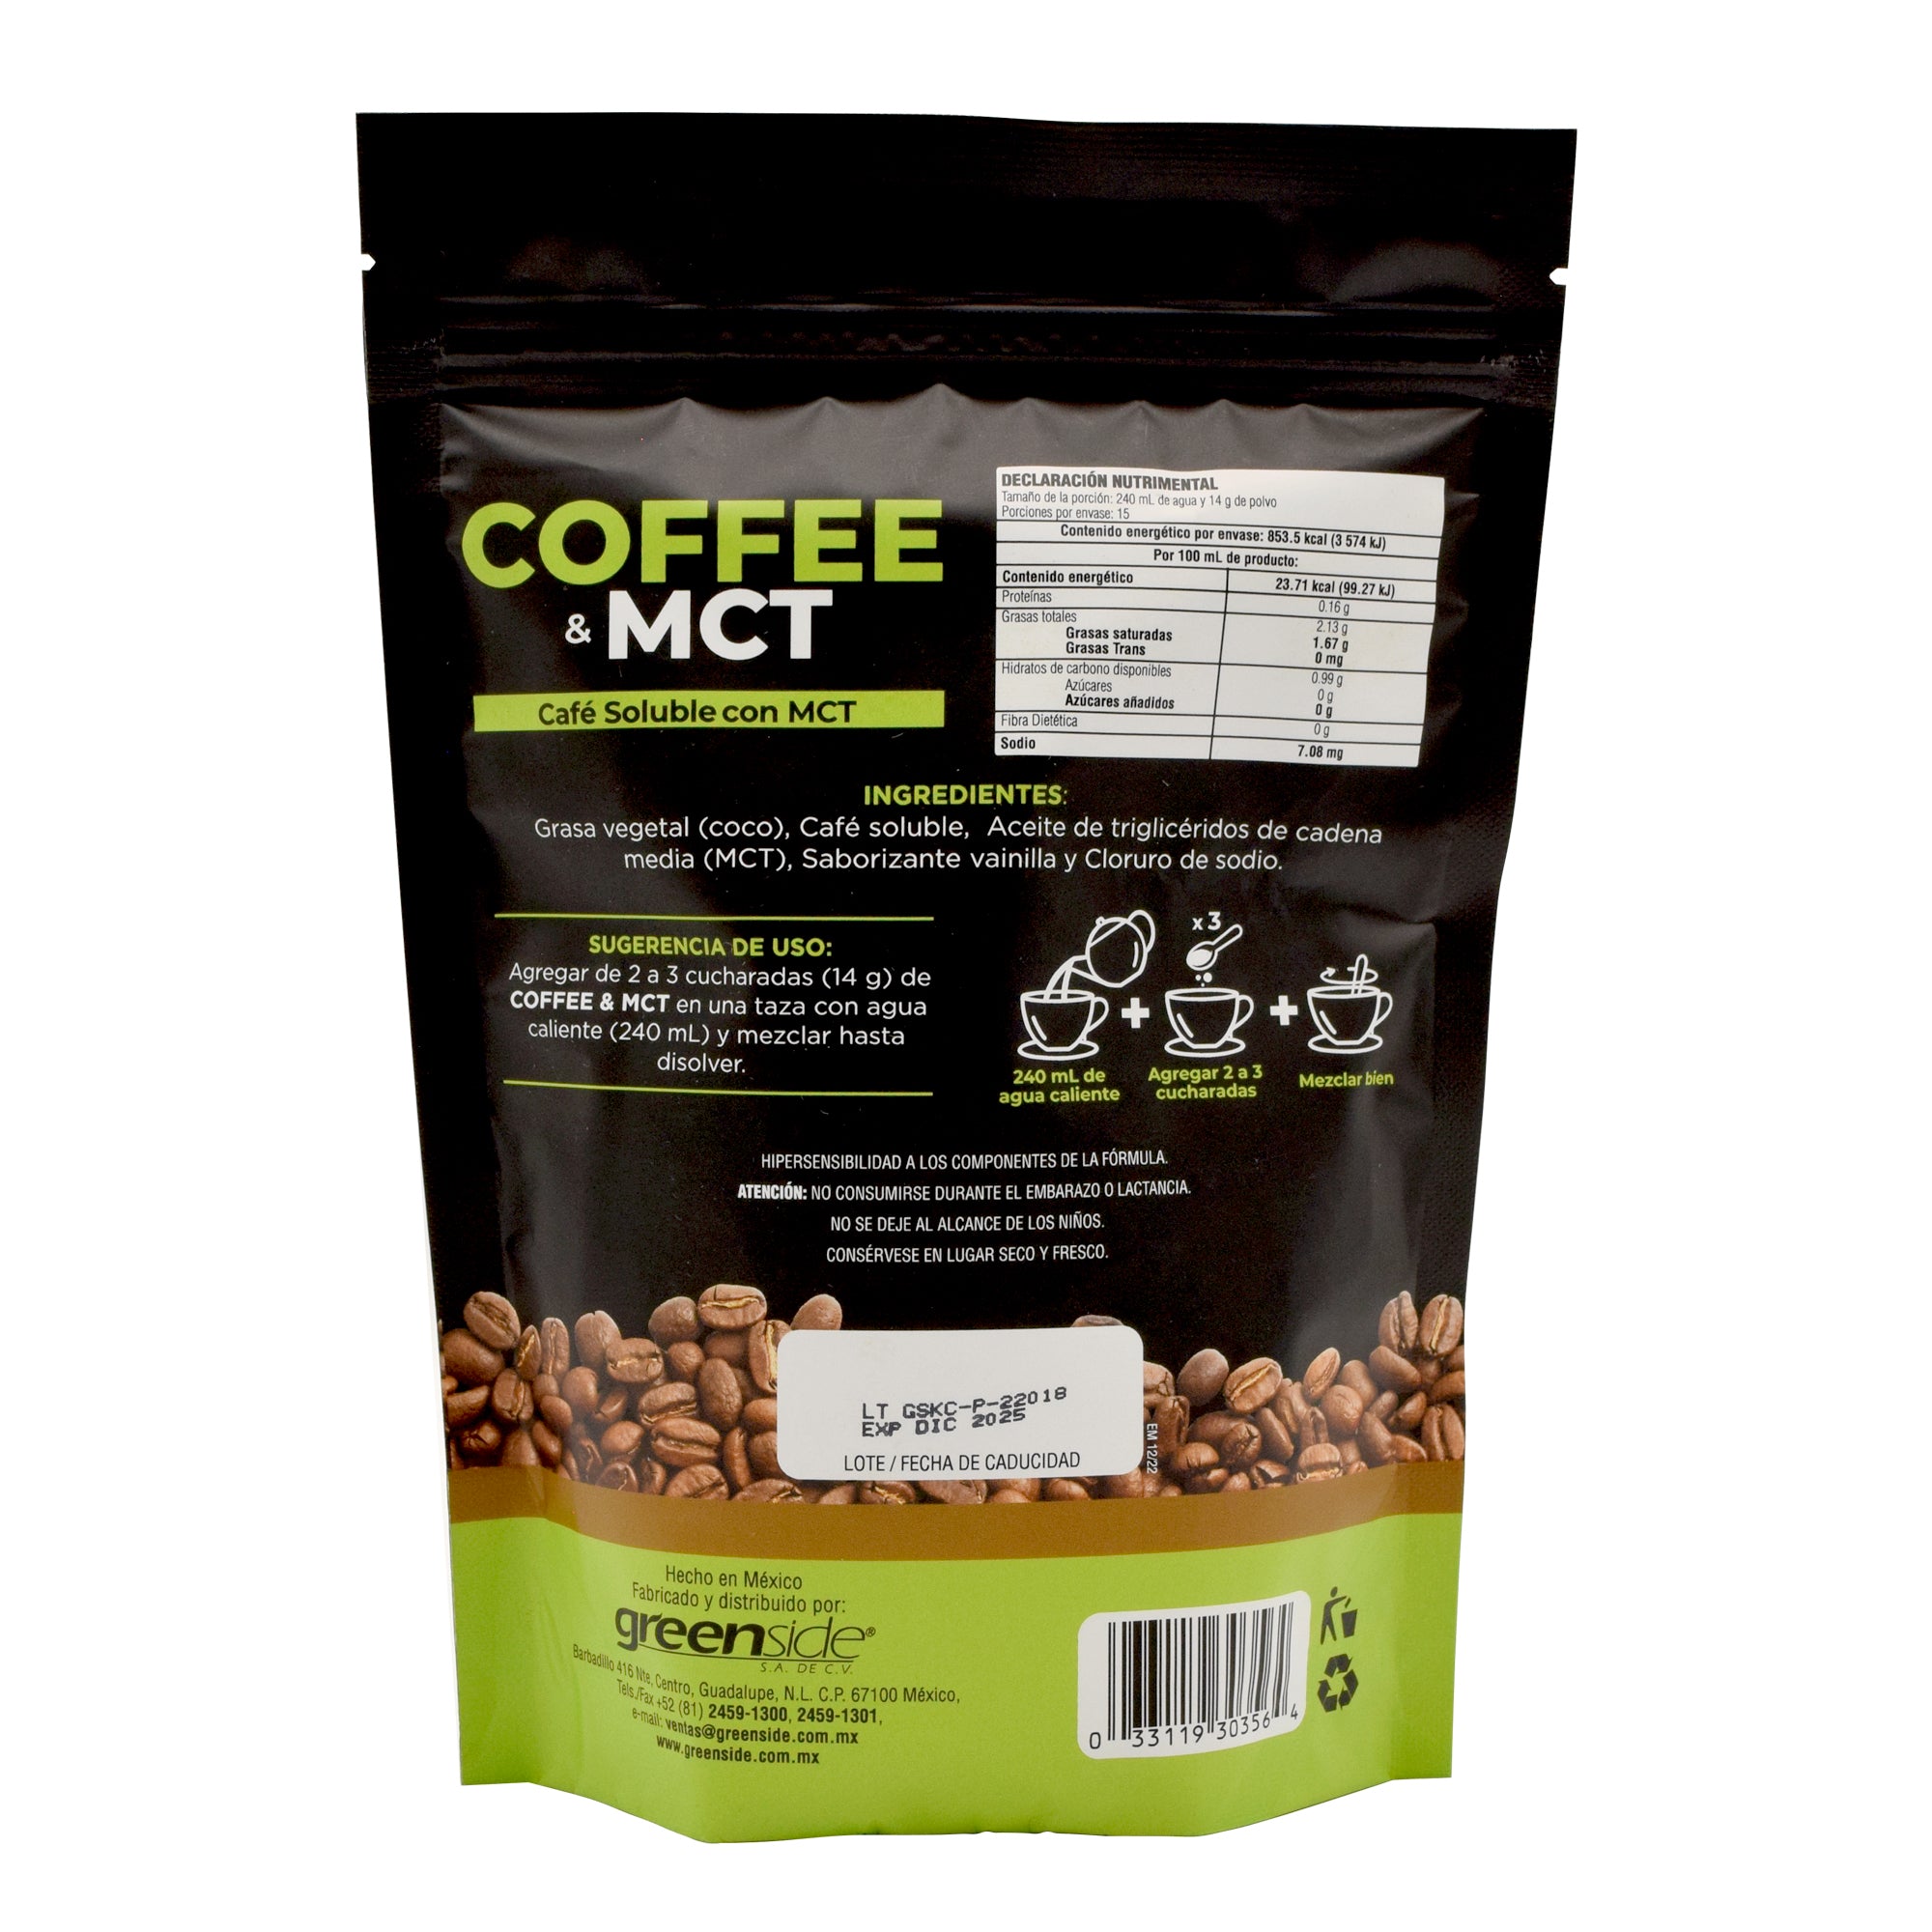 CAFE SOLUBLE CON MCT 210 G